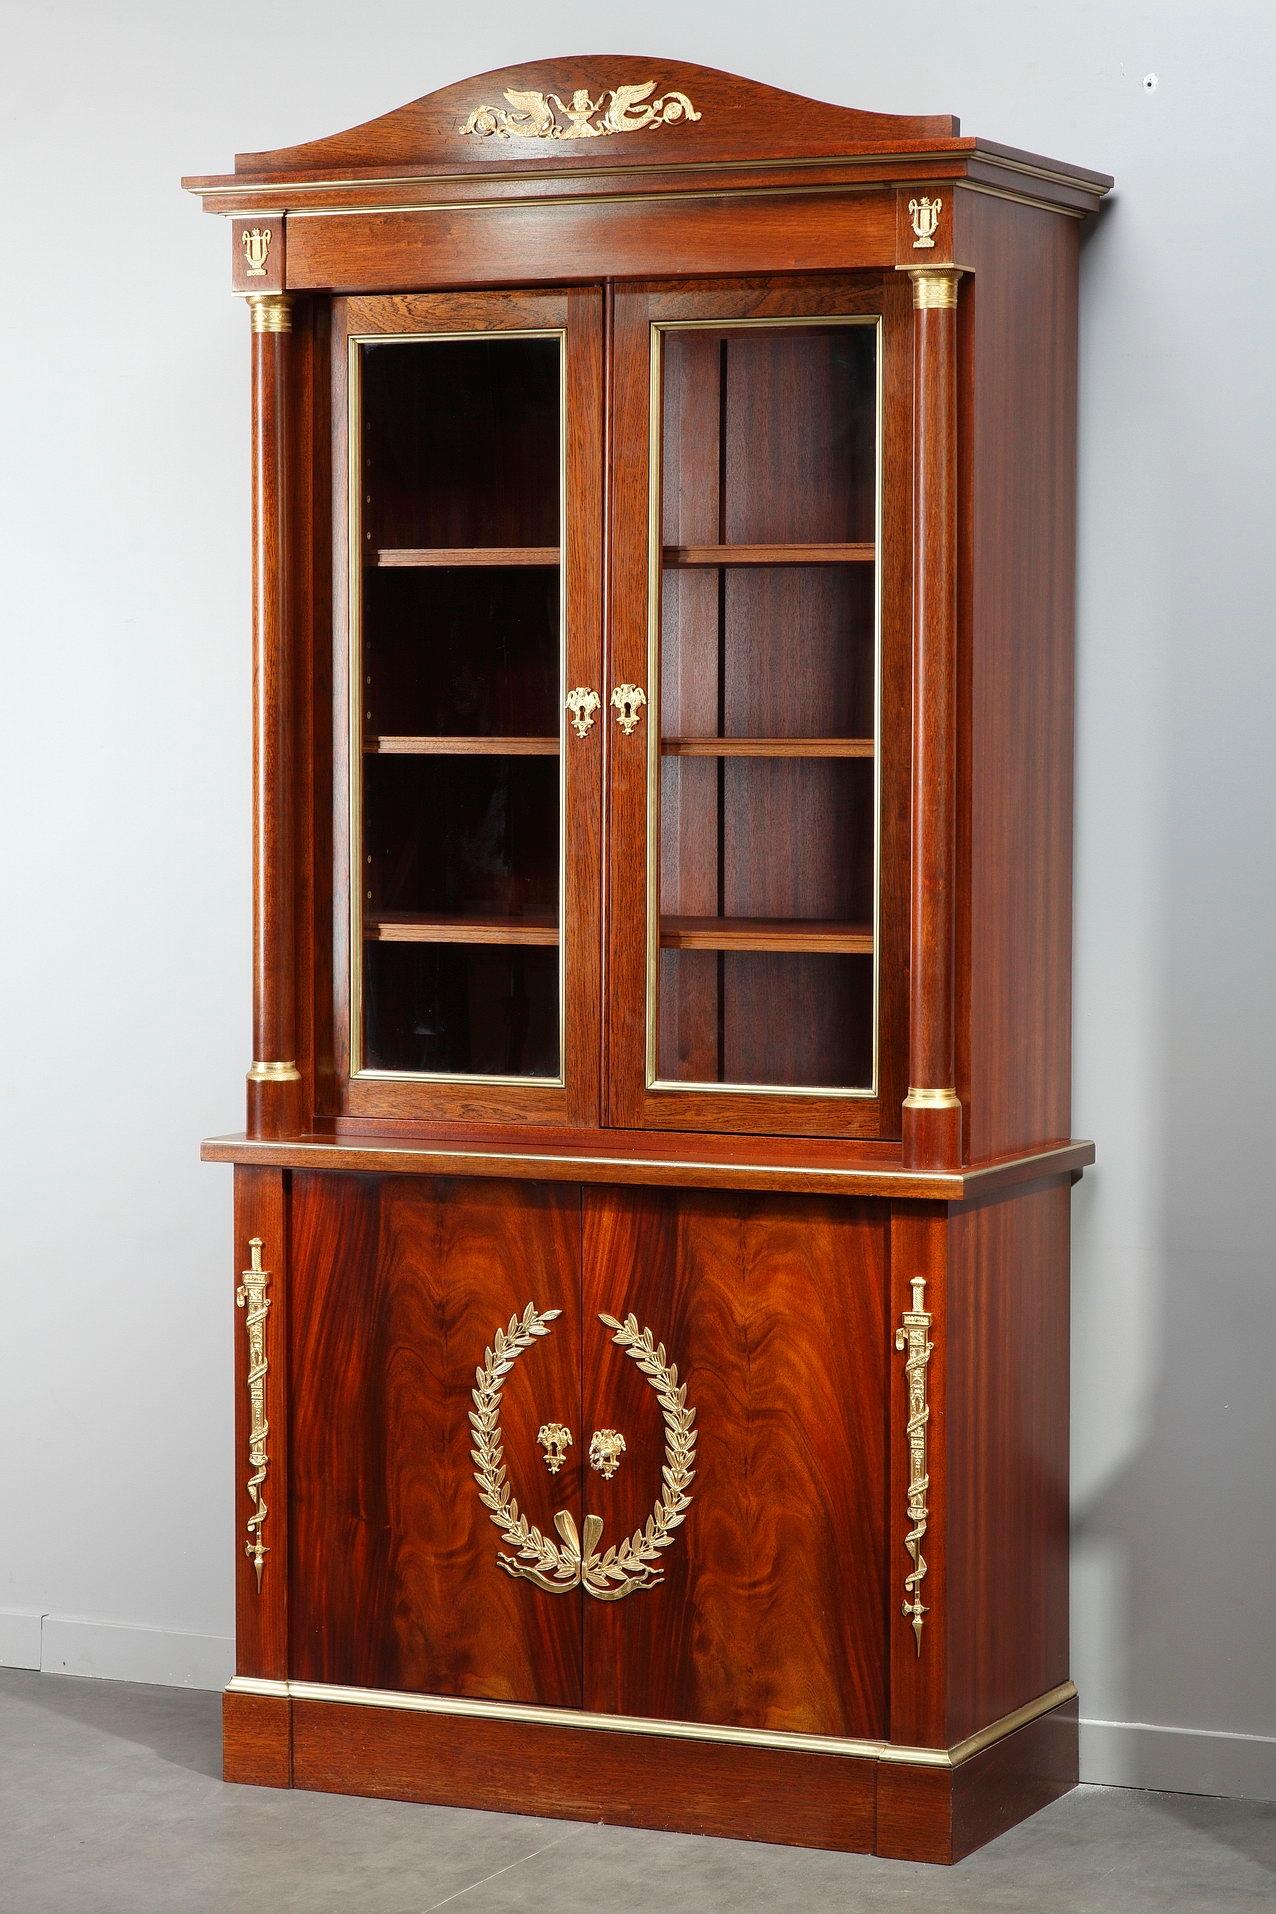 French Early 19th Century Empire-Style Bookcases by Maison Jansen